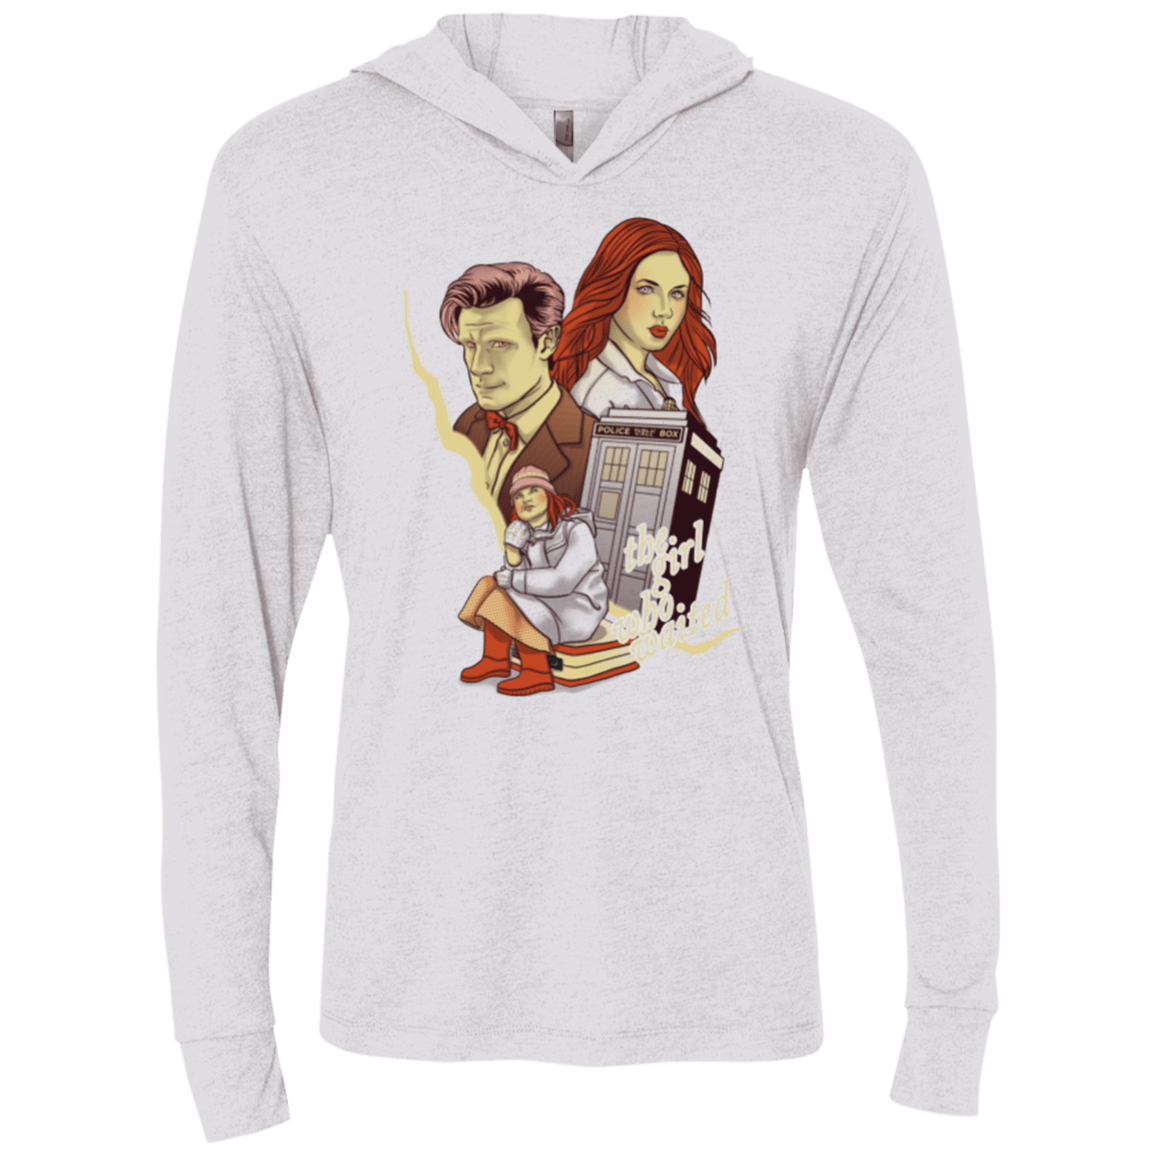 T-Shirts Heather White / X-Small The Girl who waited Triblend Long Sleeve Hoodie Tee